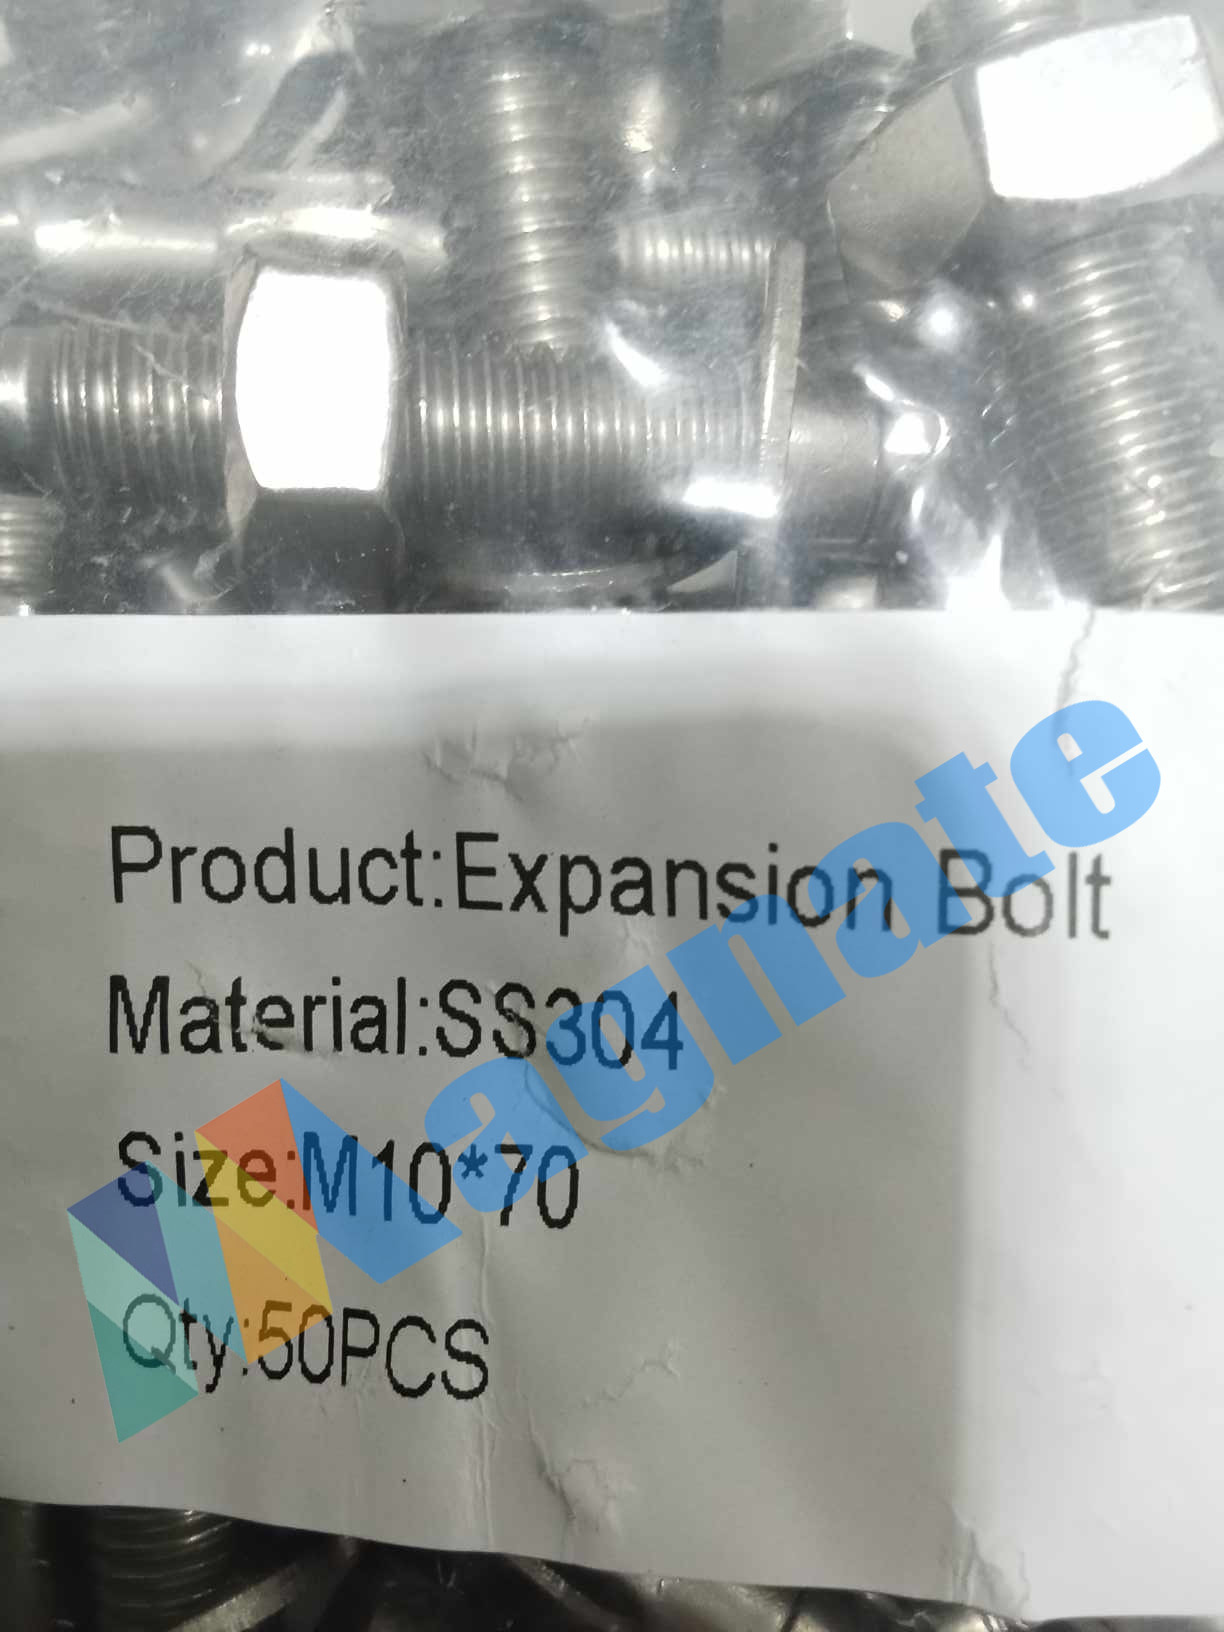 Expansion Bolt Material: SS304 Size: M10*70